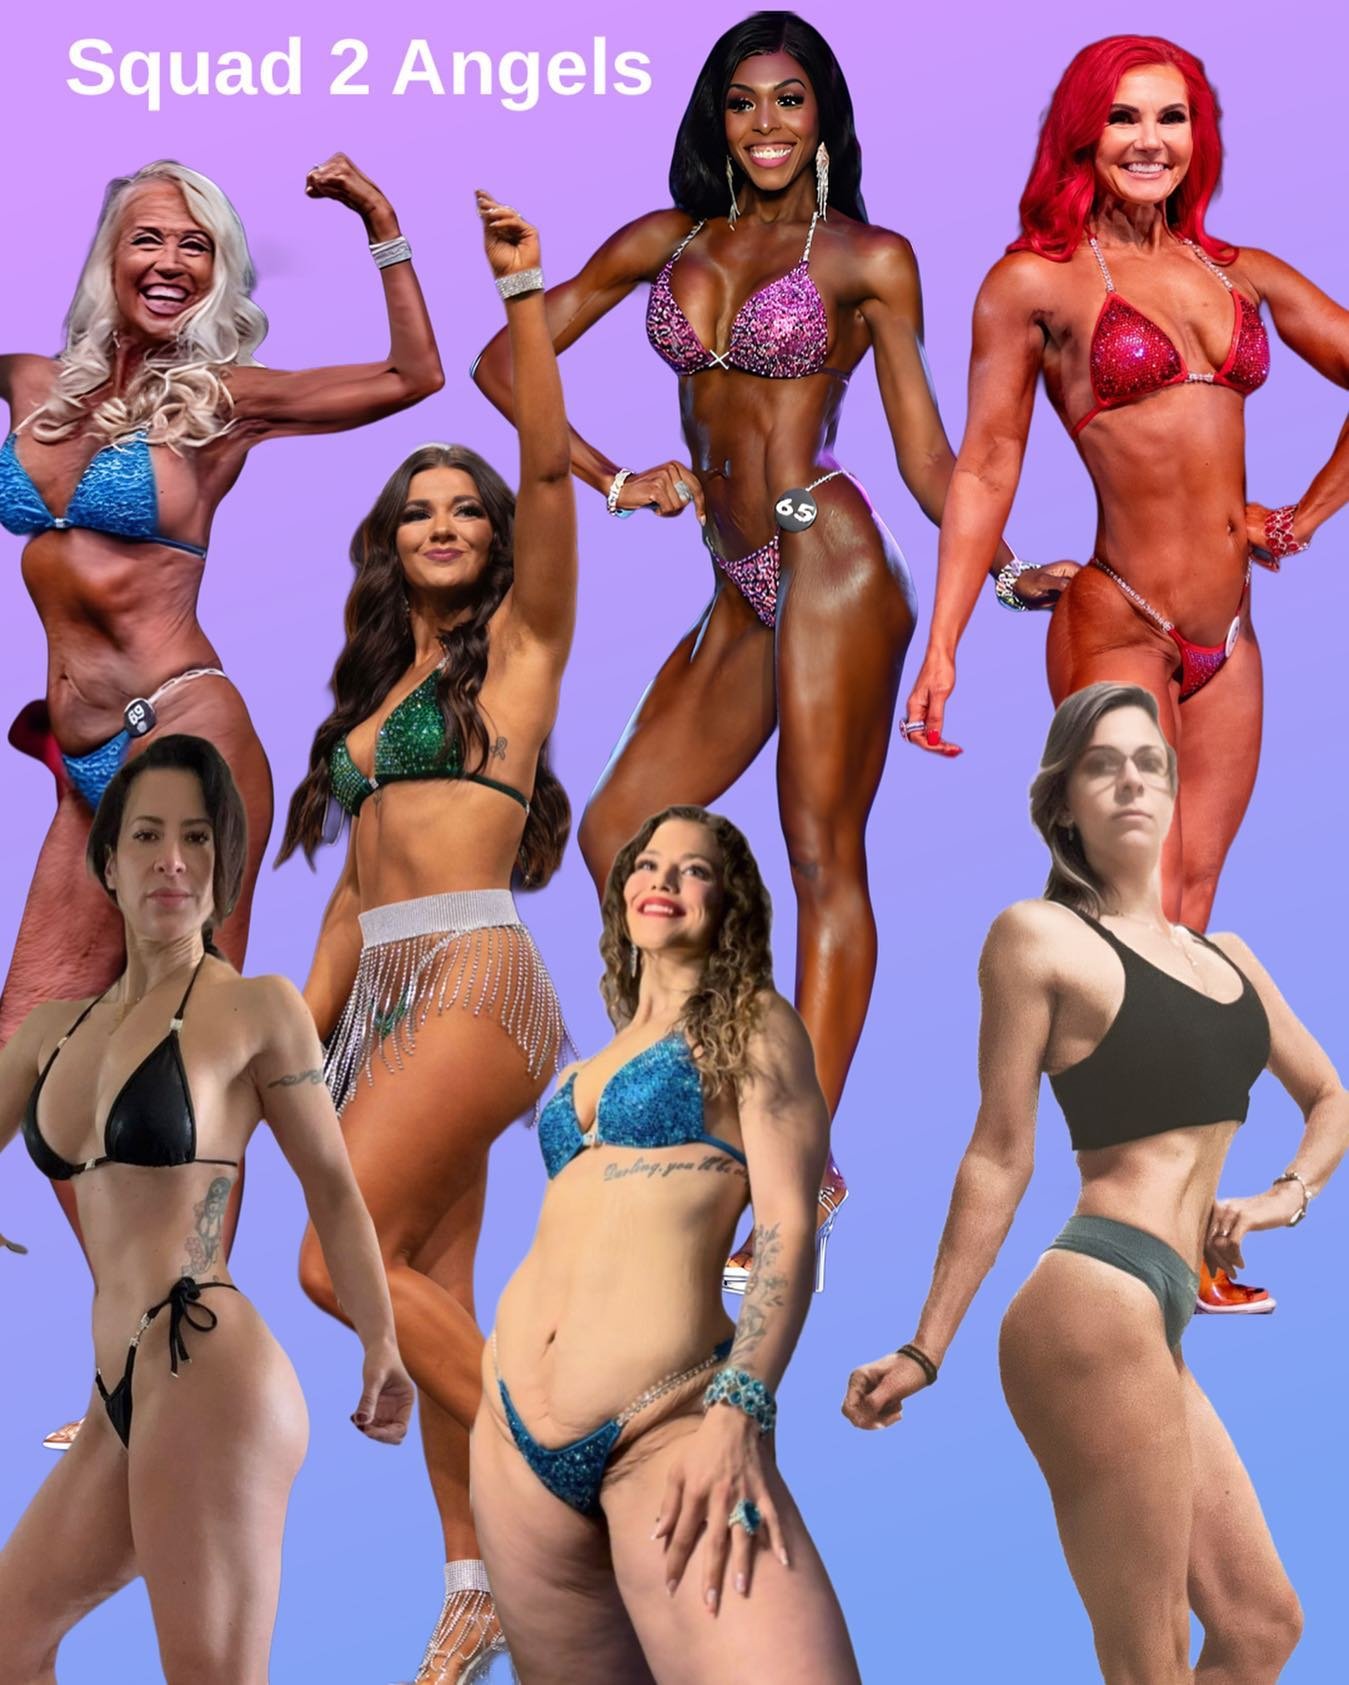 May I present the beautiful brilliant angels of Squad 2 @angelcompetitionbikinis @angelfashionshow Baltimore edition! Can&rsquo;t wait to walk the stage with these phenomenal athletes and amazing women on May 11th!

#confidentinacbikinis #angelcompet